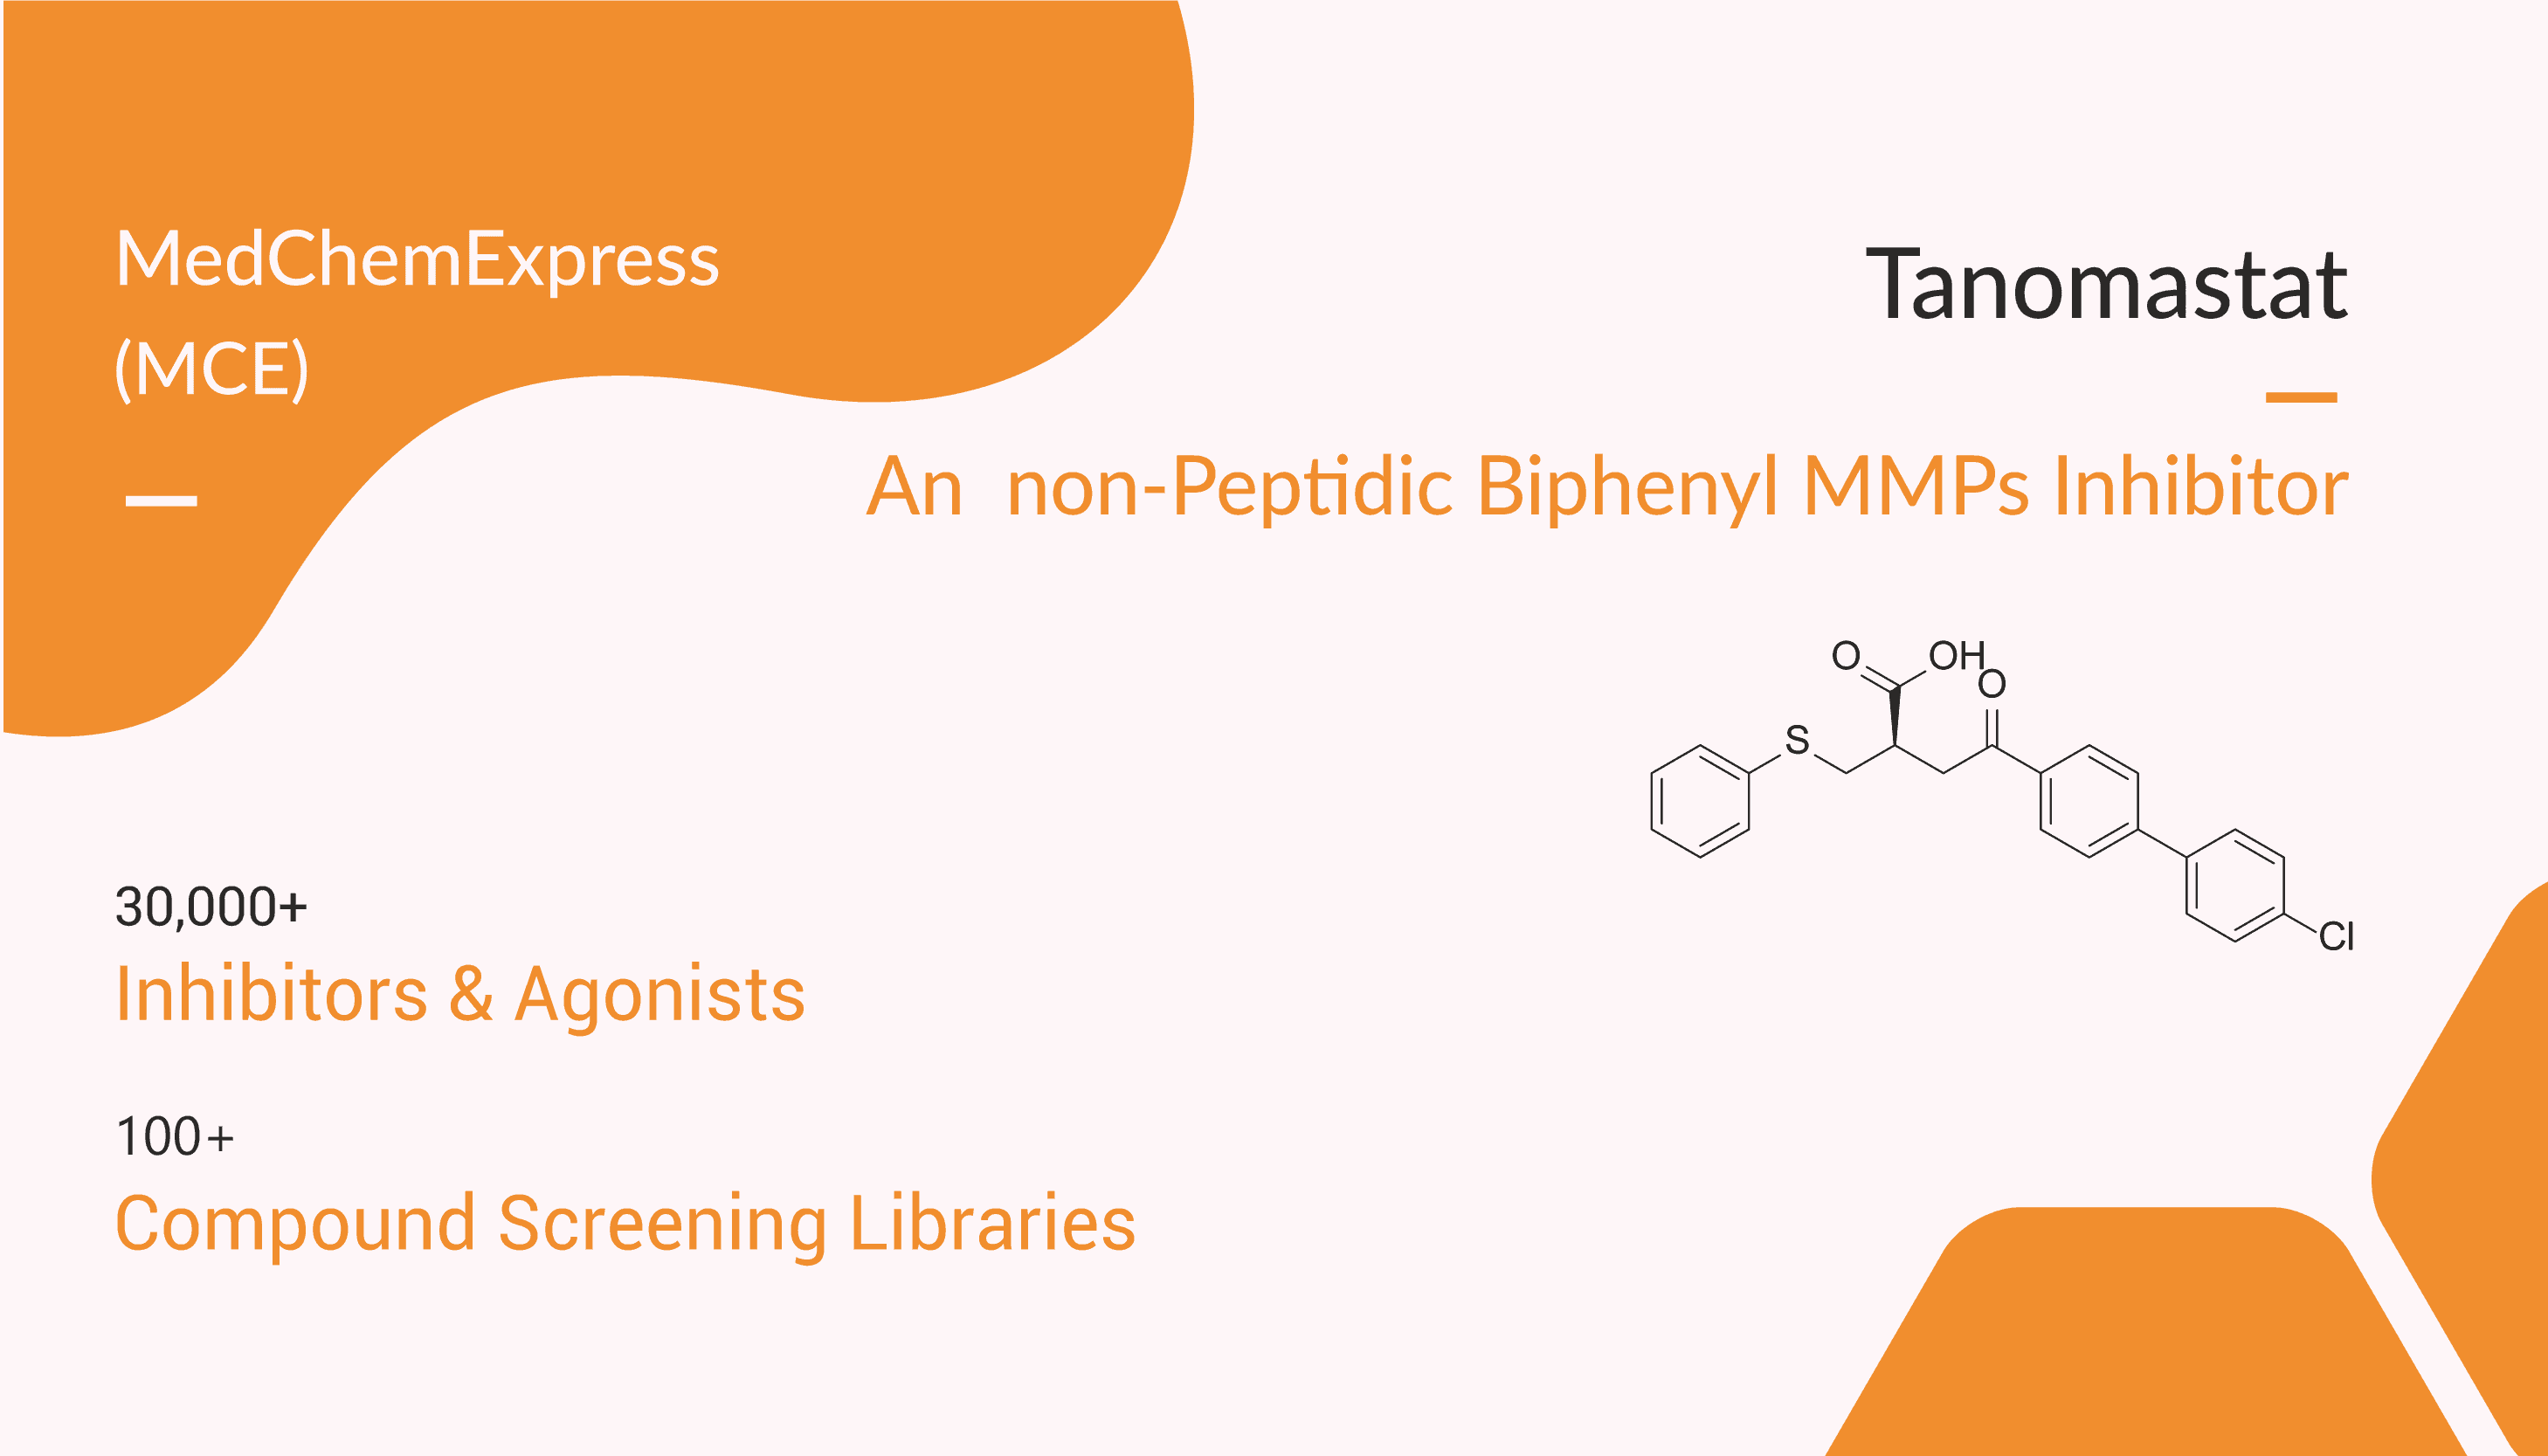 Tanomastat is an Orally Bioavailable, non-Peptidic Biphenyl MMPs Inhibitor